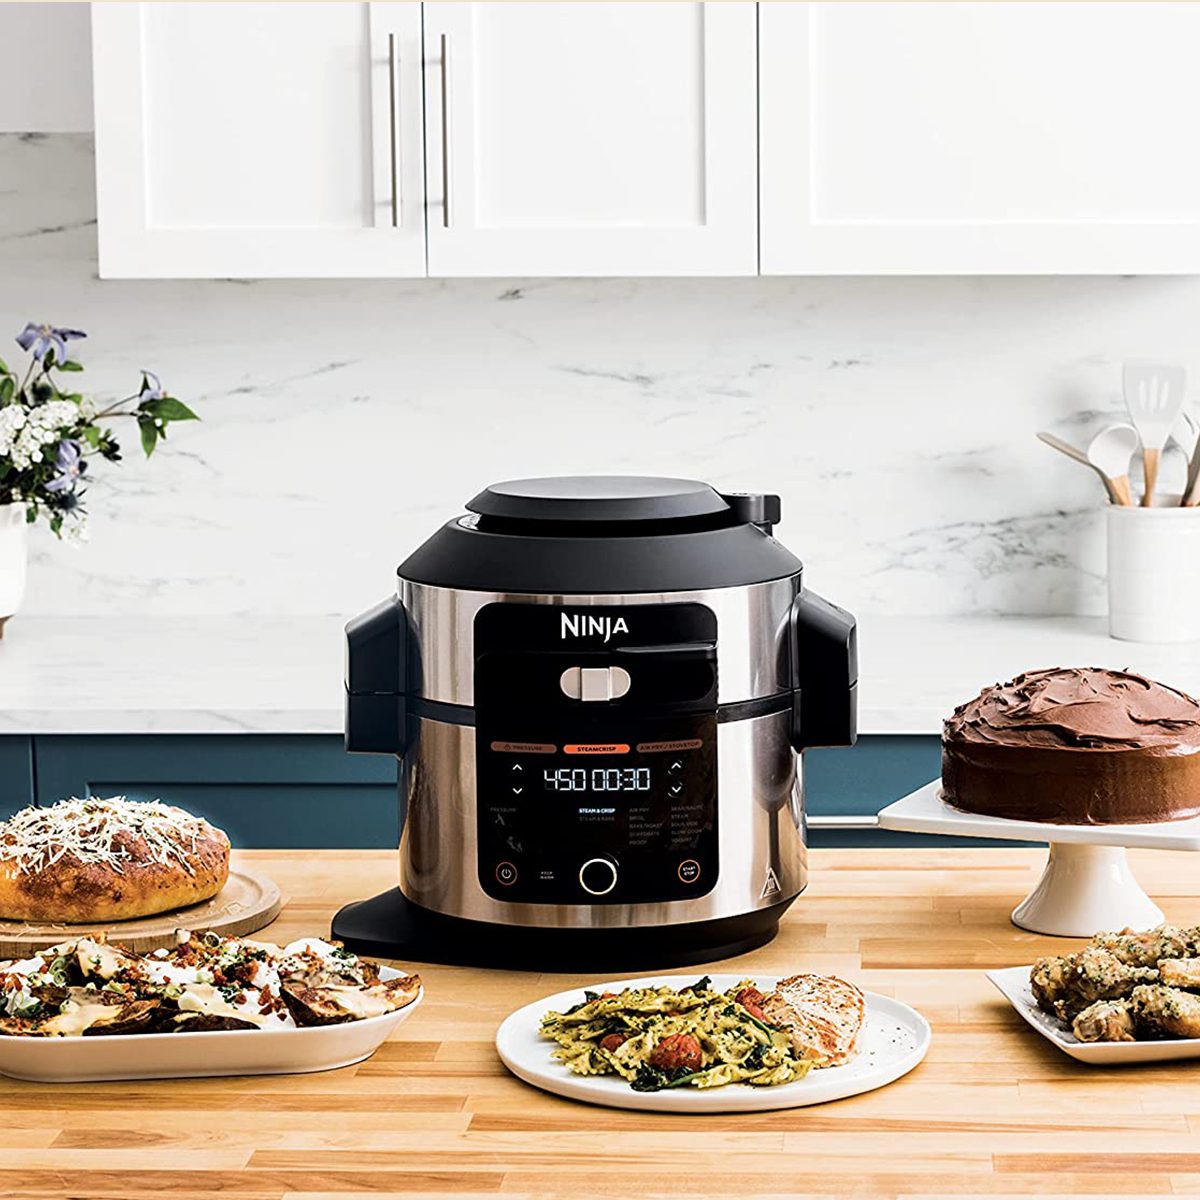 Ninja Air Fryers: Shop for Essential Kitchen Small Appliances